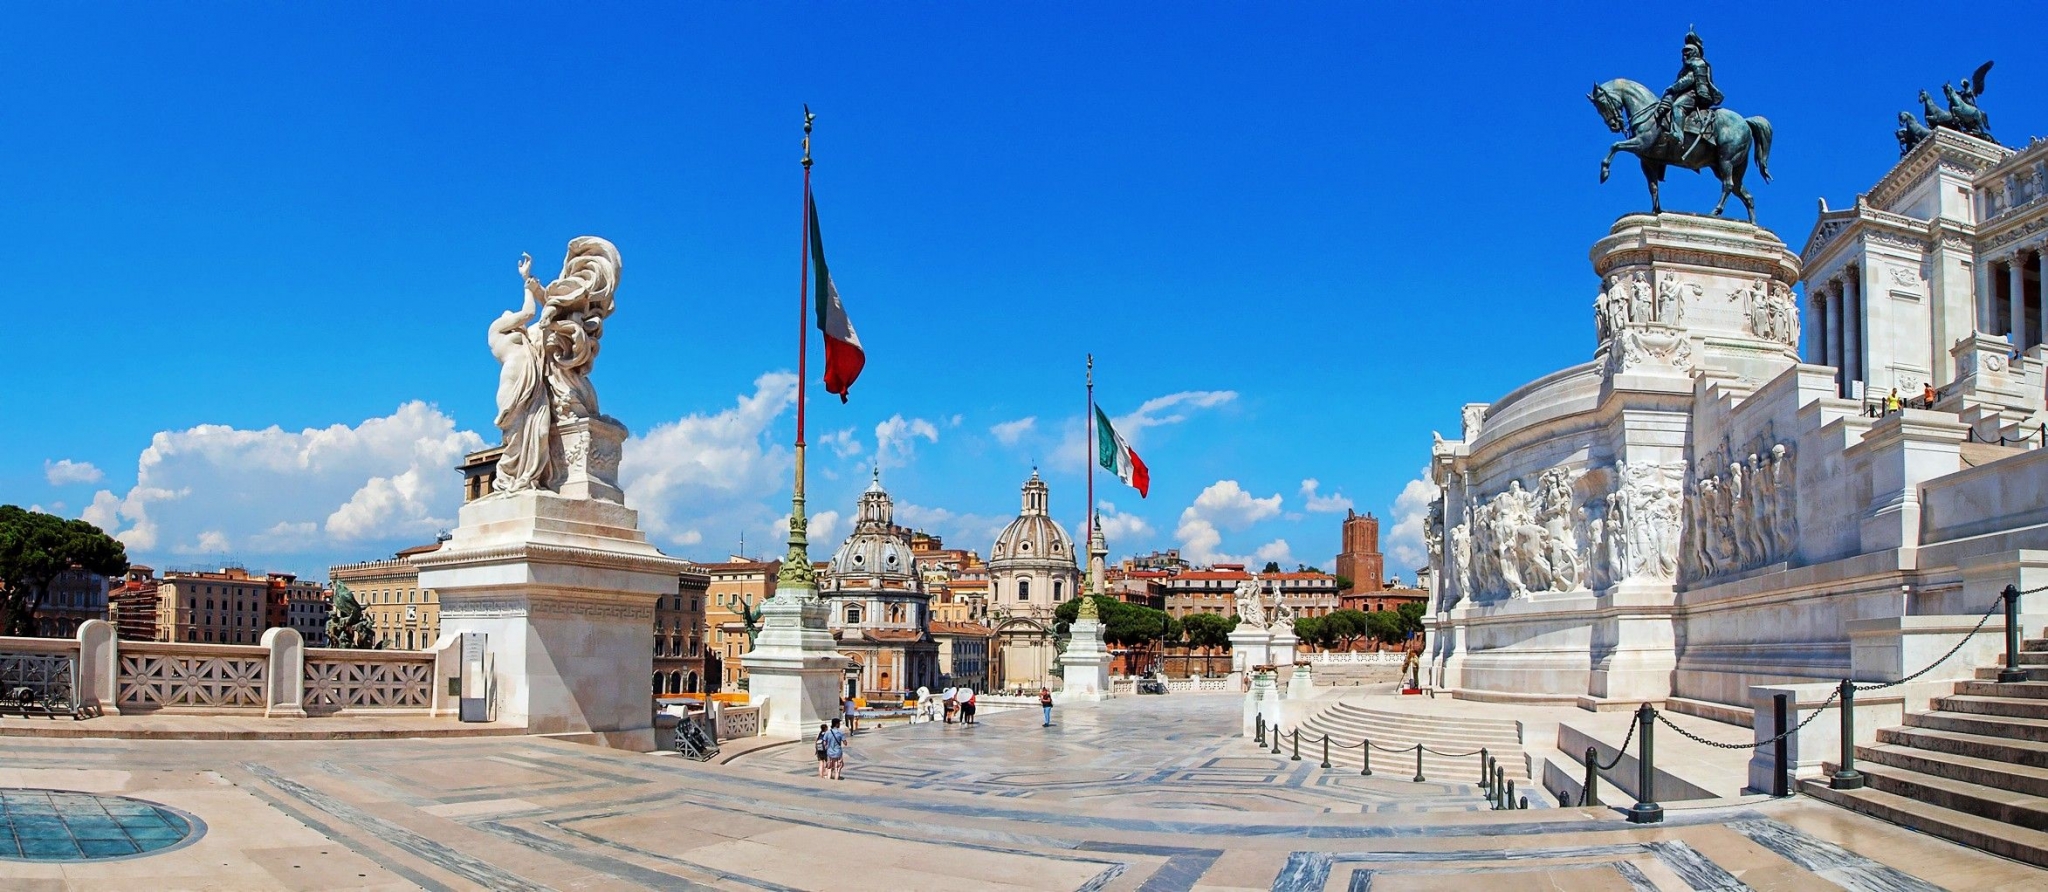 /assets/contentimages/Panorama-Monumento-a-Vittorio-Emanuele-II-Rome-Italy.jpg